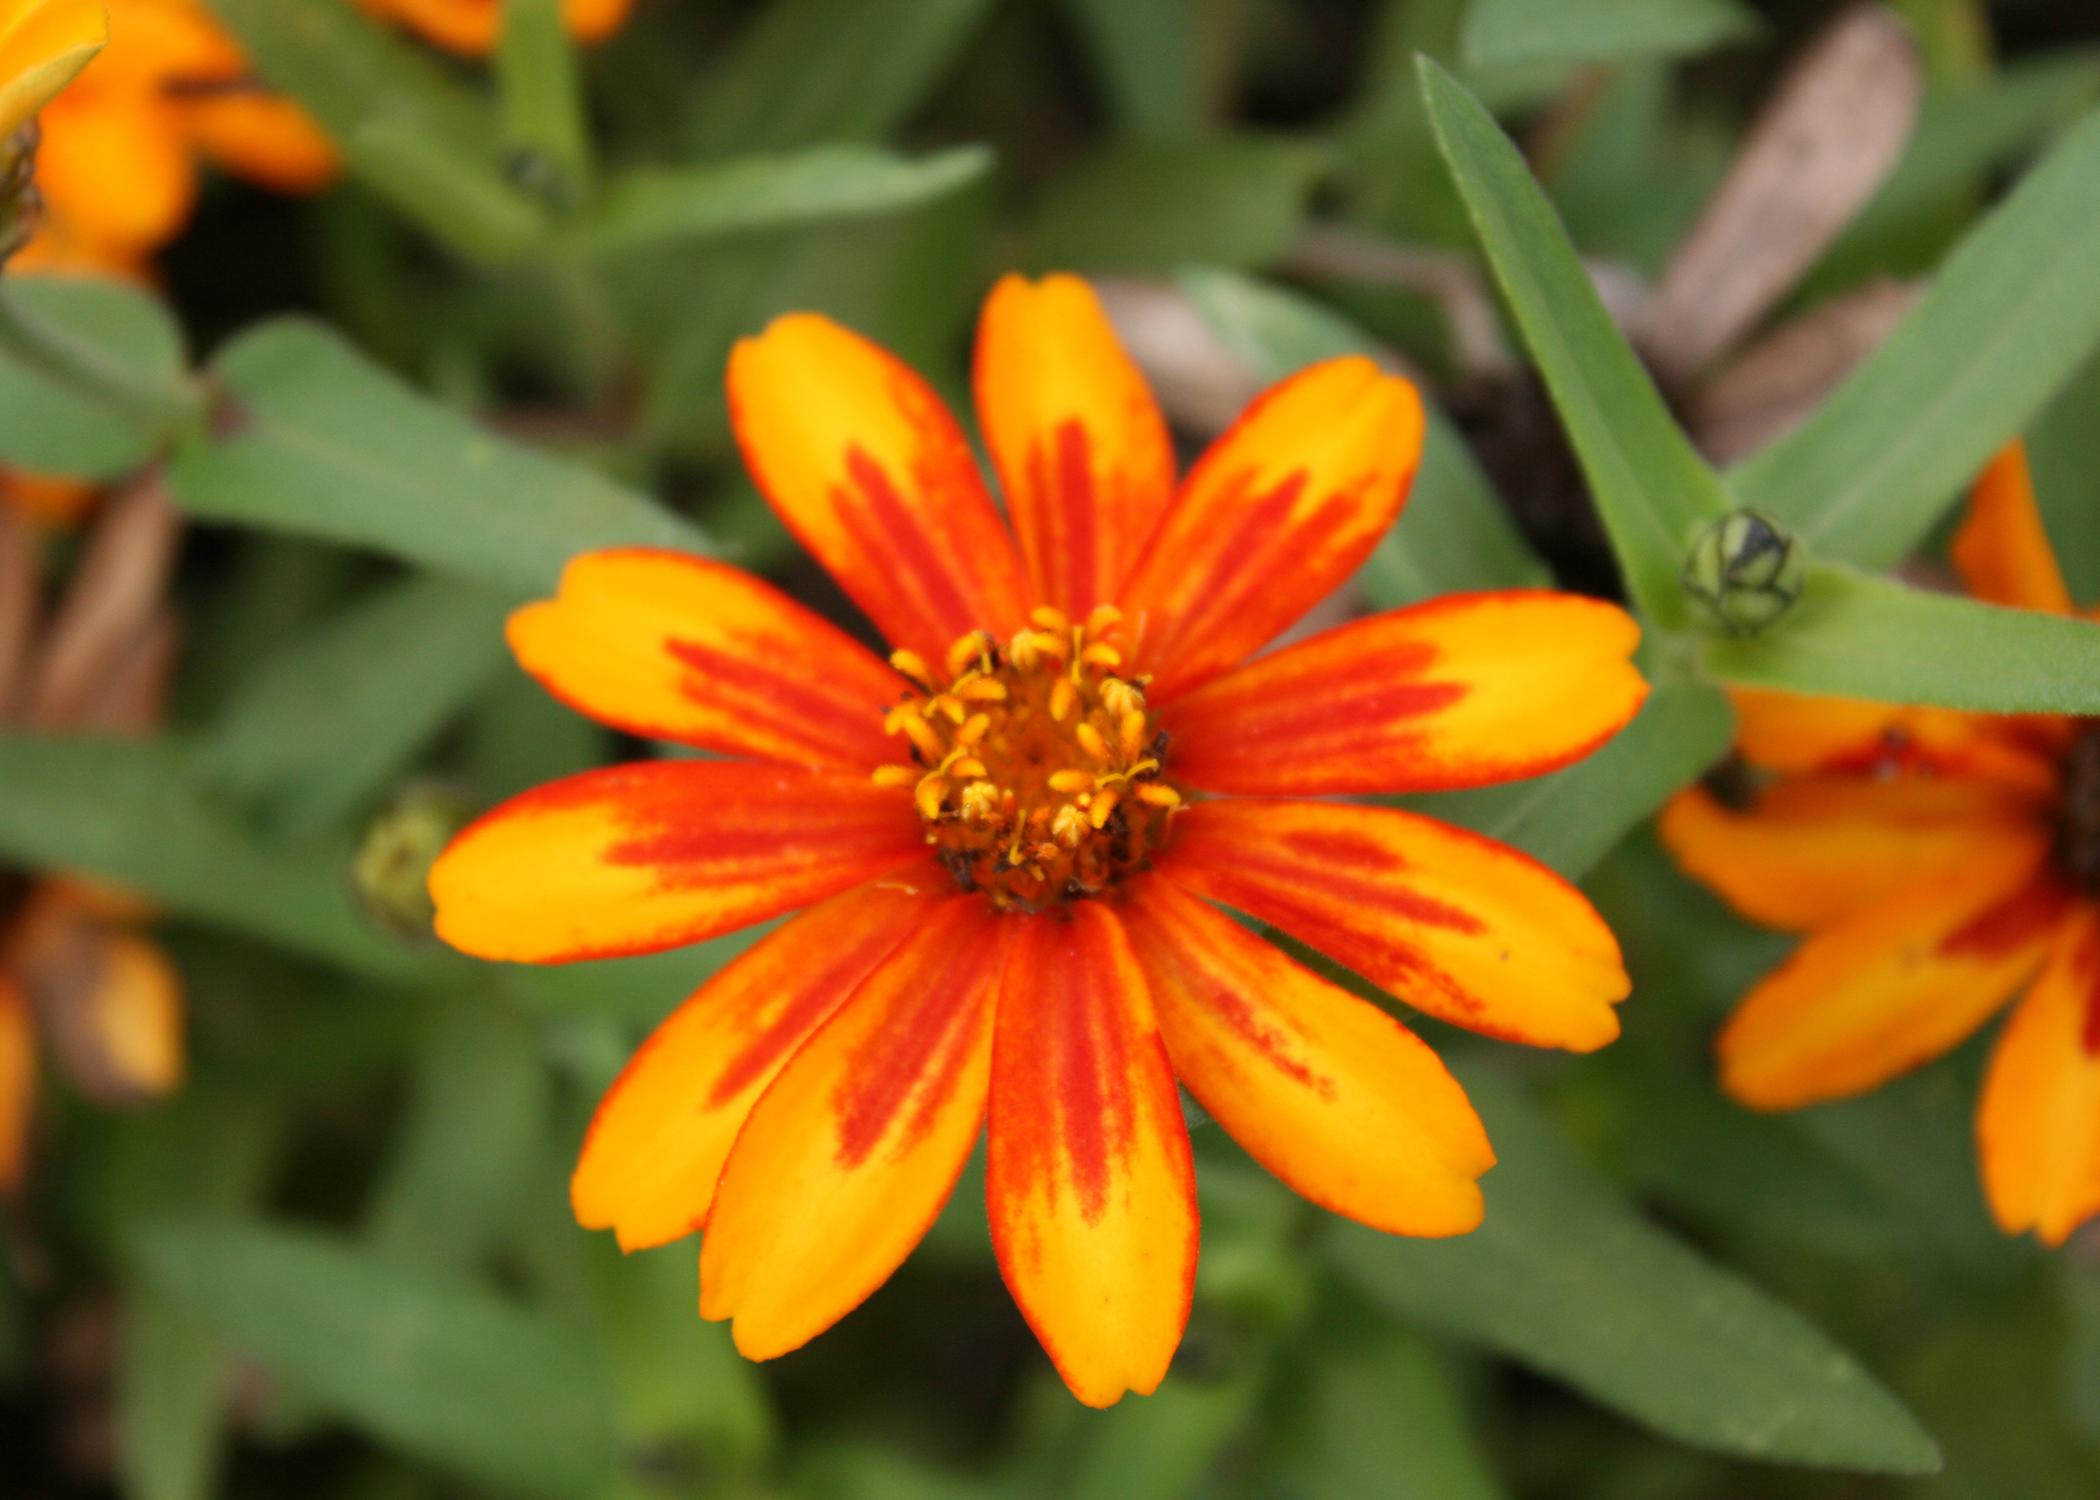 A single, orange bloom is open against a background of green.